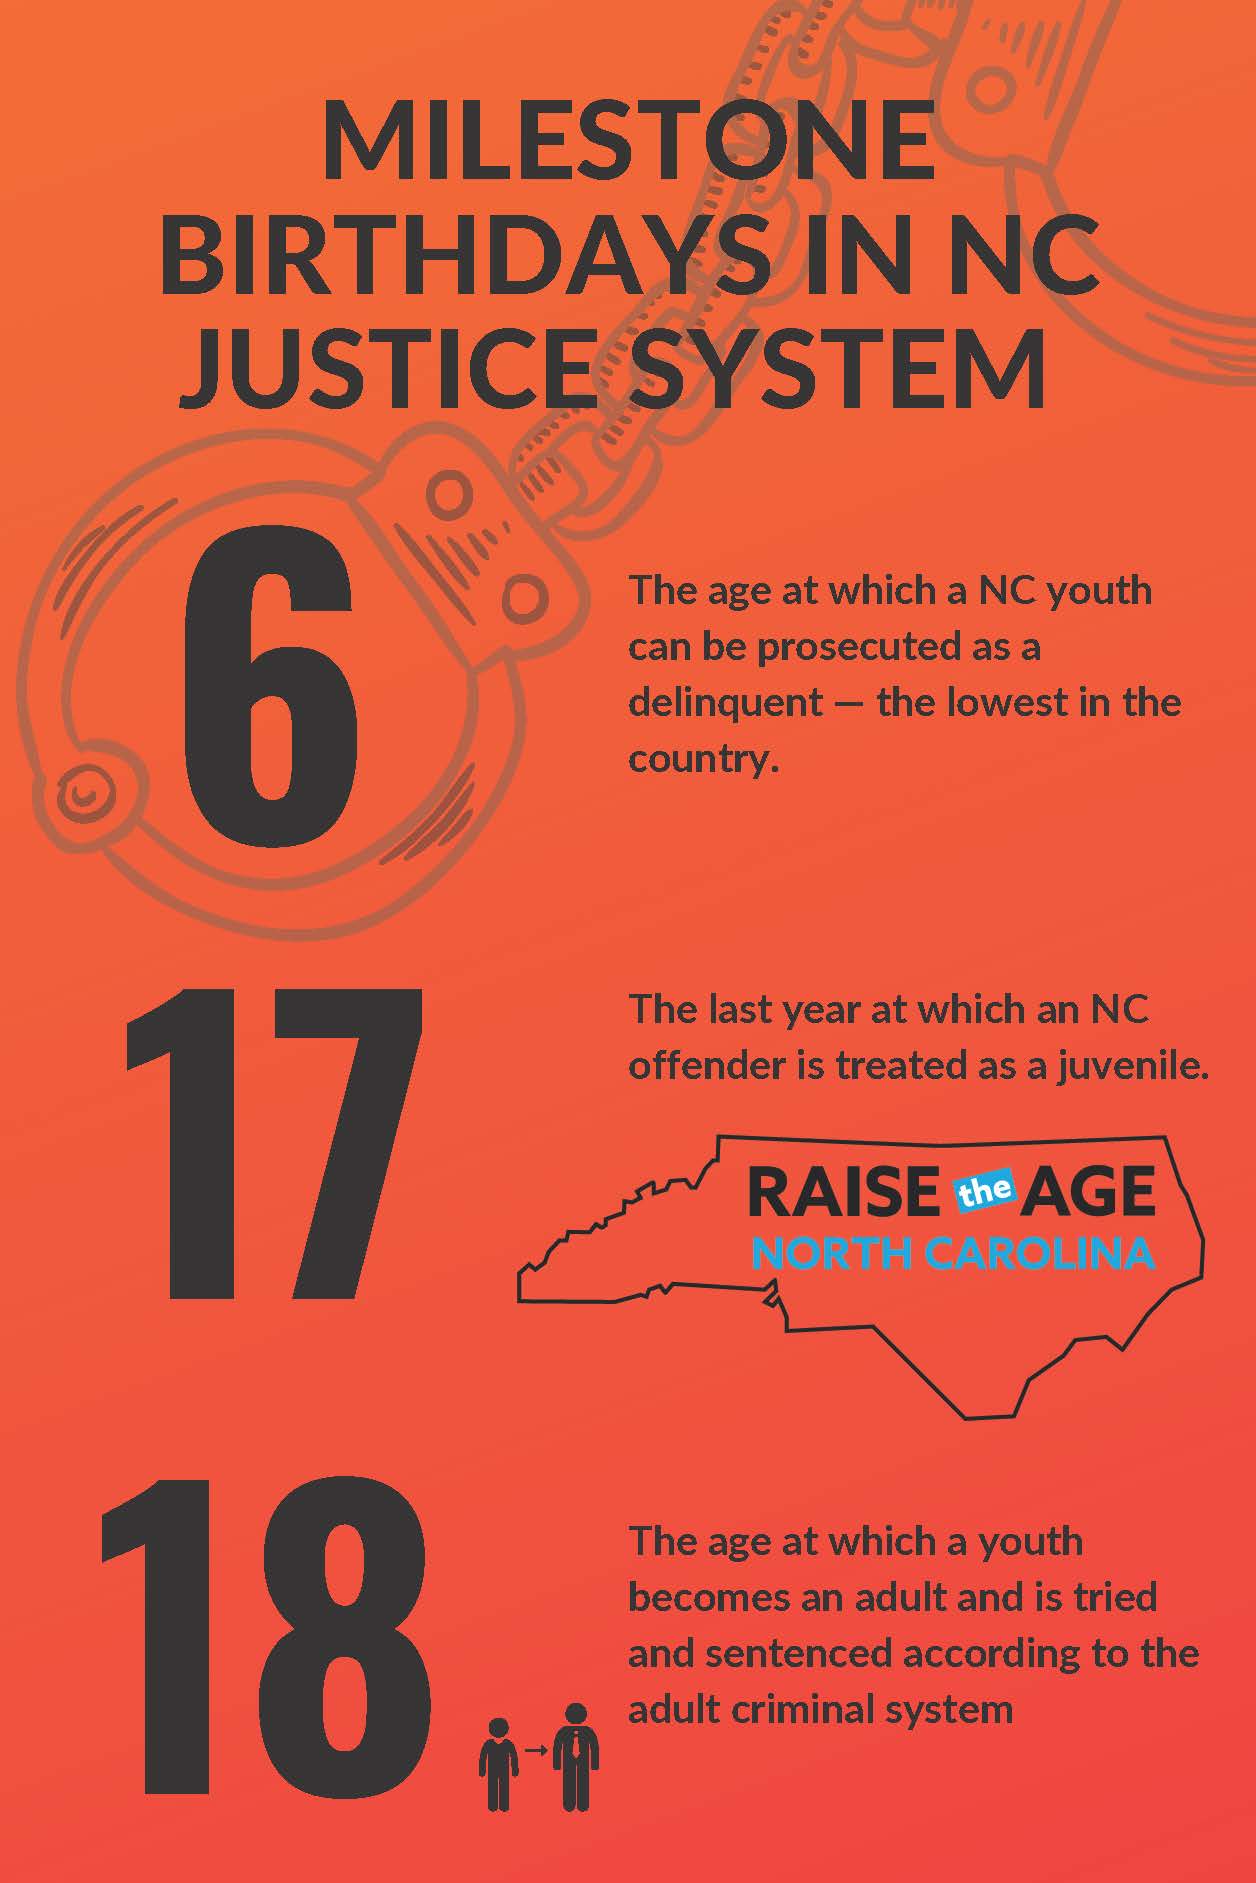 North Carolina: Ages that are indicate key points at which youth can enter and be filtered through the justice system in North Carolina once Raise the Age takes effect.